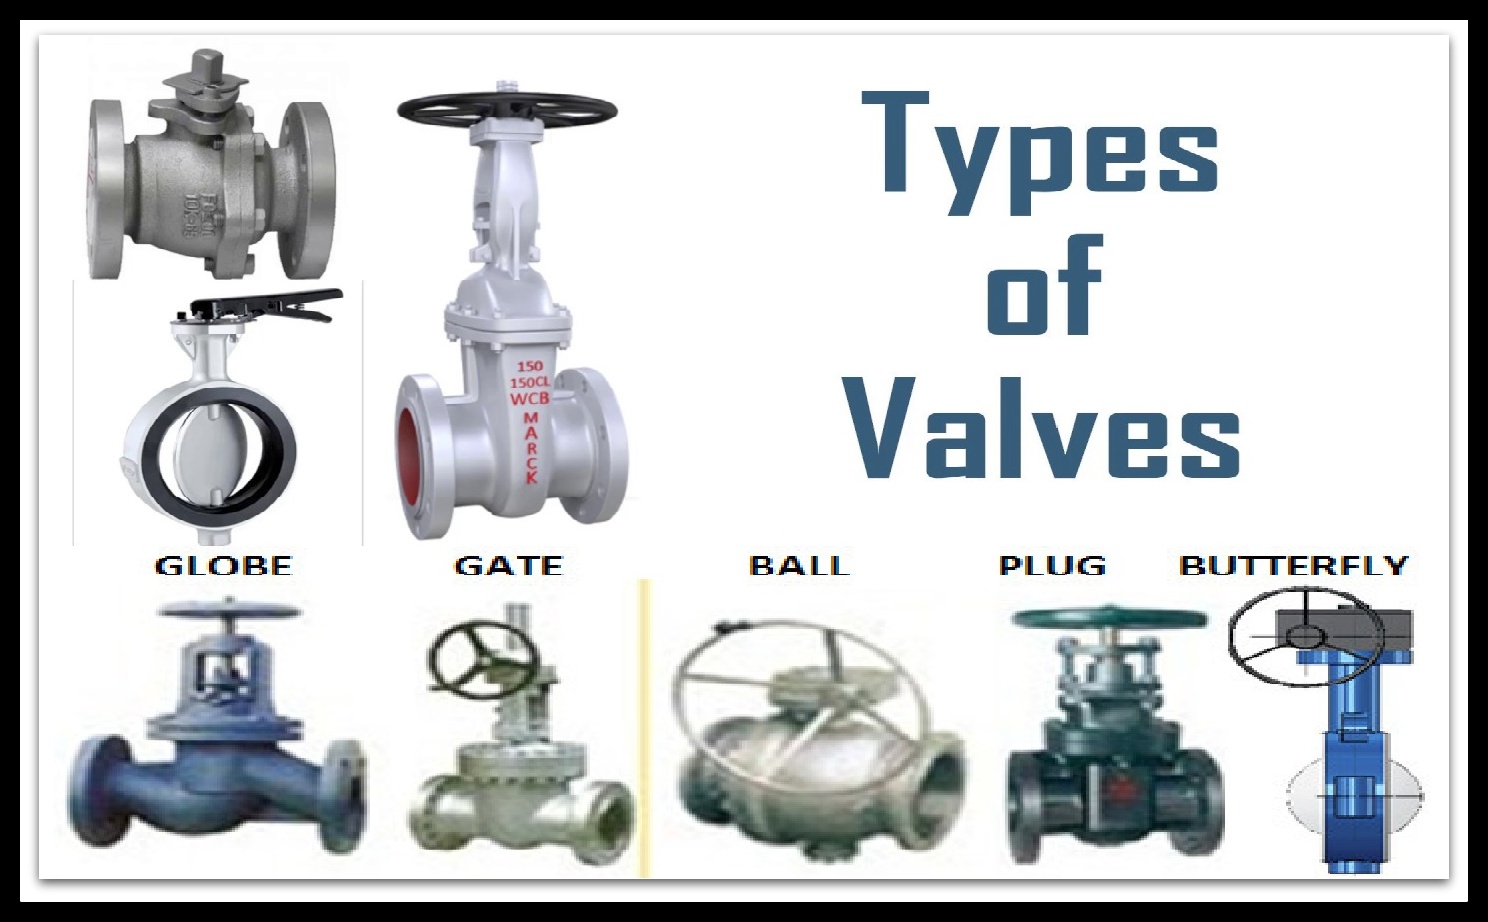 5 Major Types of Valves in Plumbing System - The Constructor